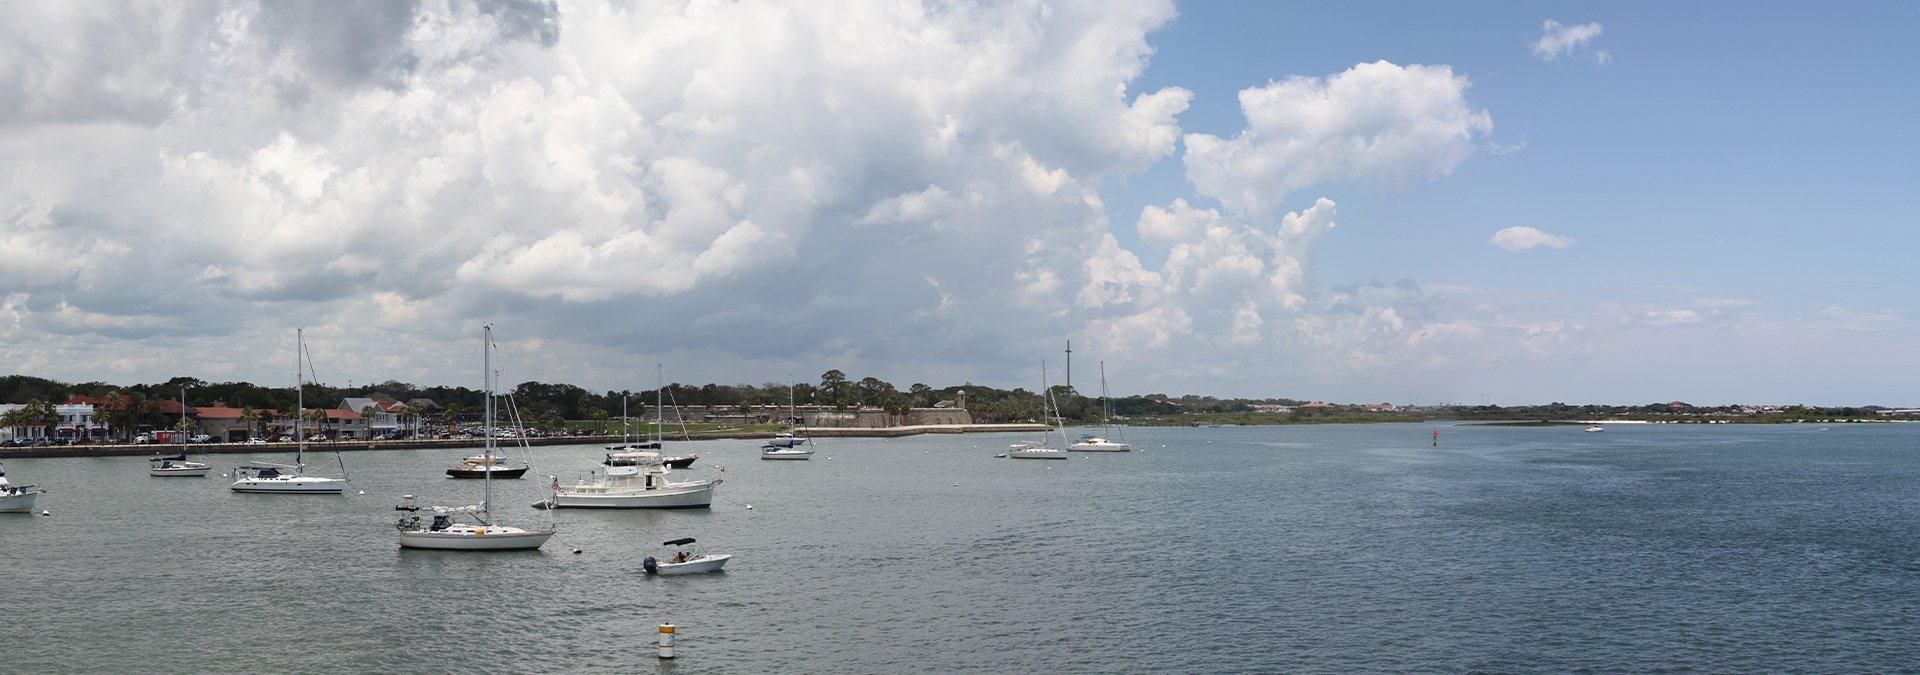 view of boats in the water in st augustine south